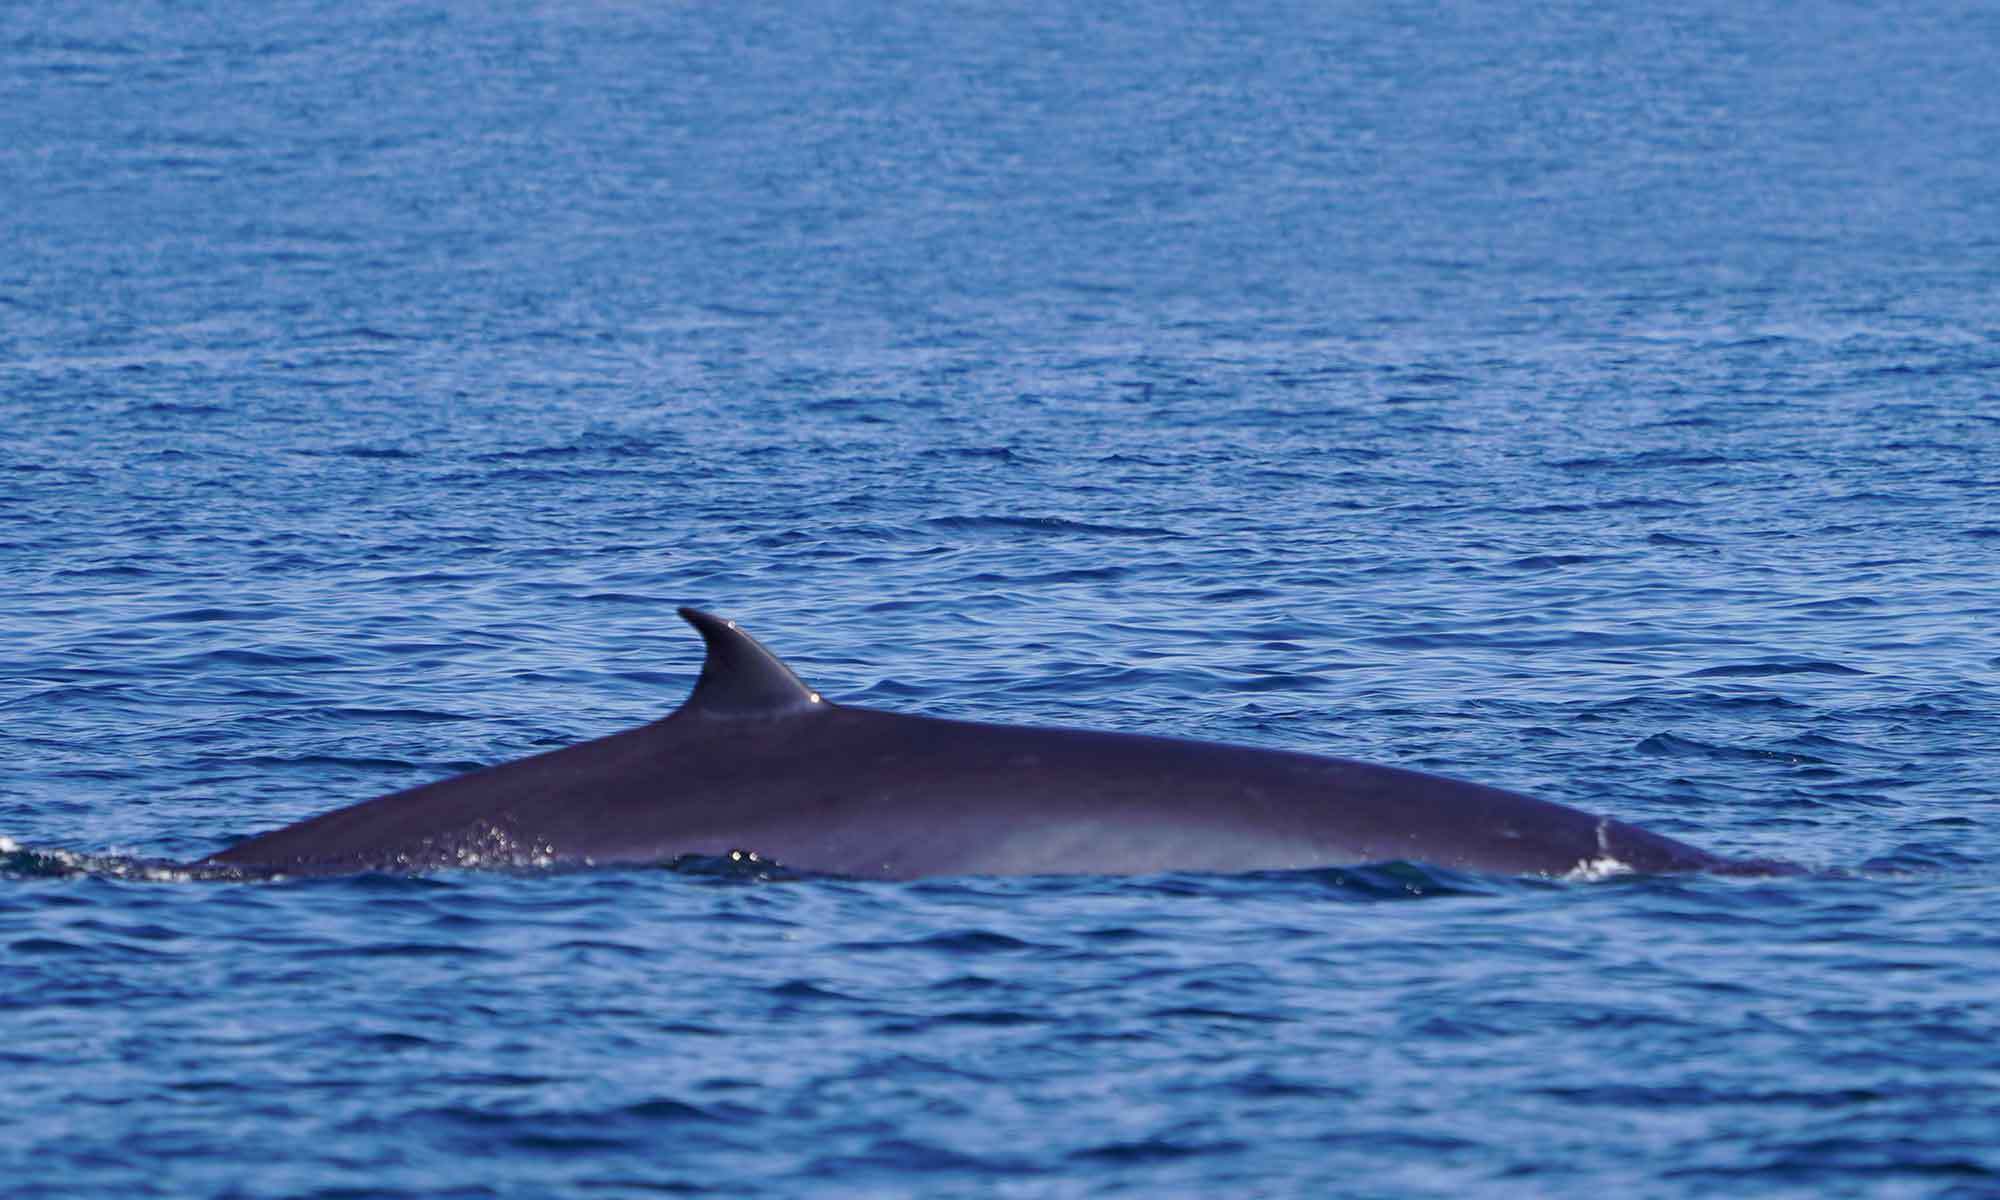 Bryde's whales are the most common species of whale to see in Madeira during the summer months.